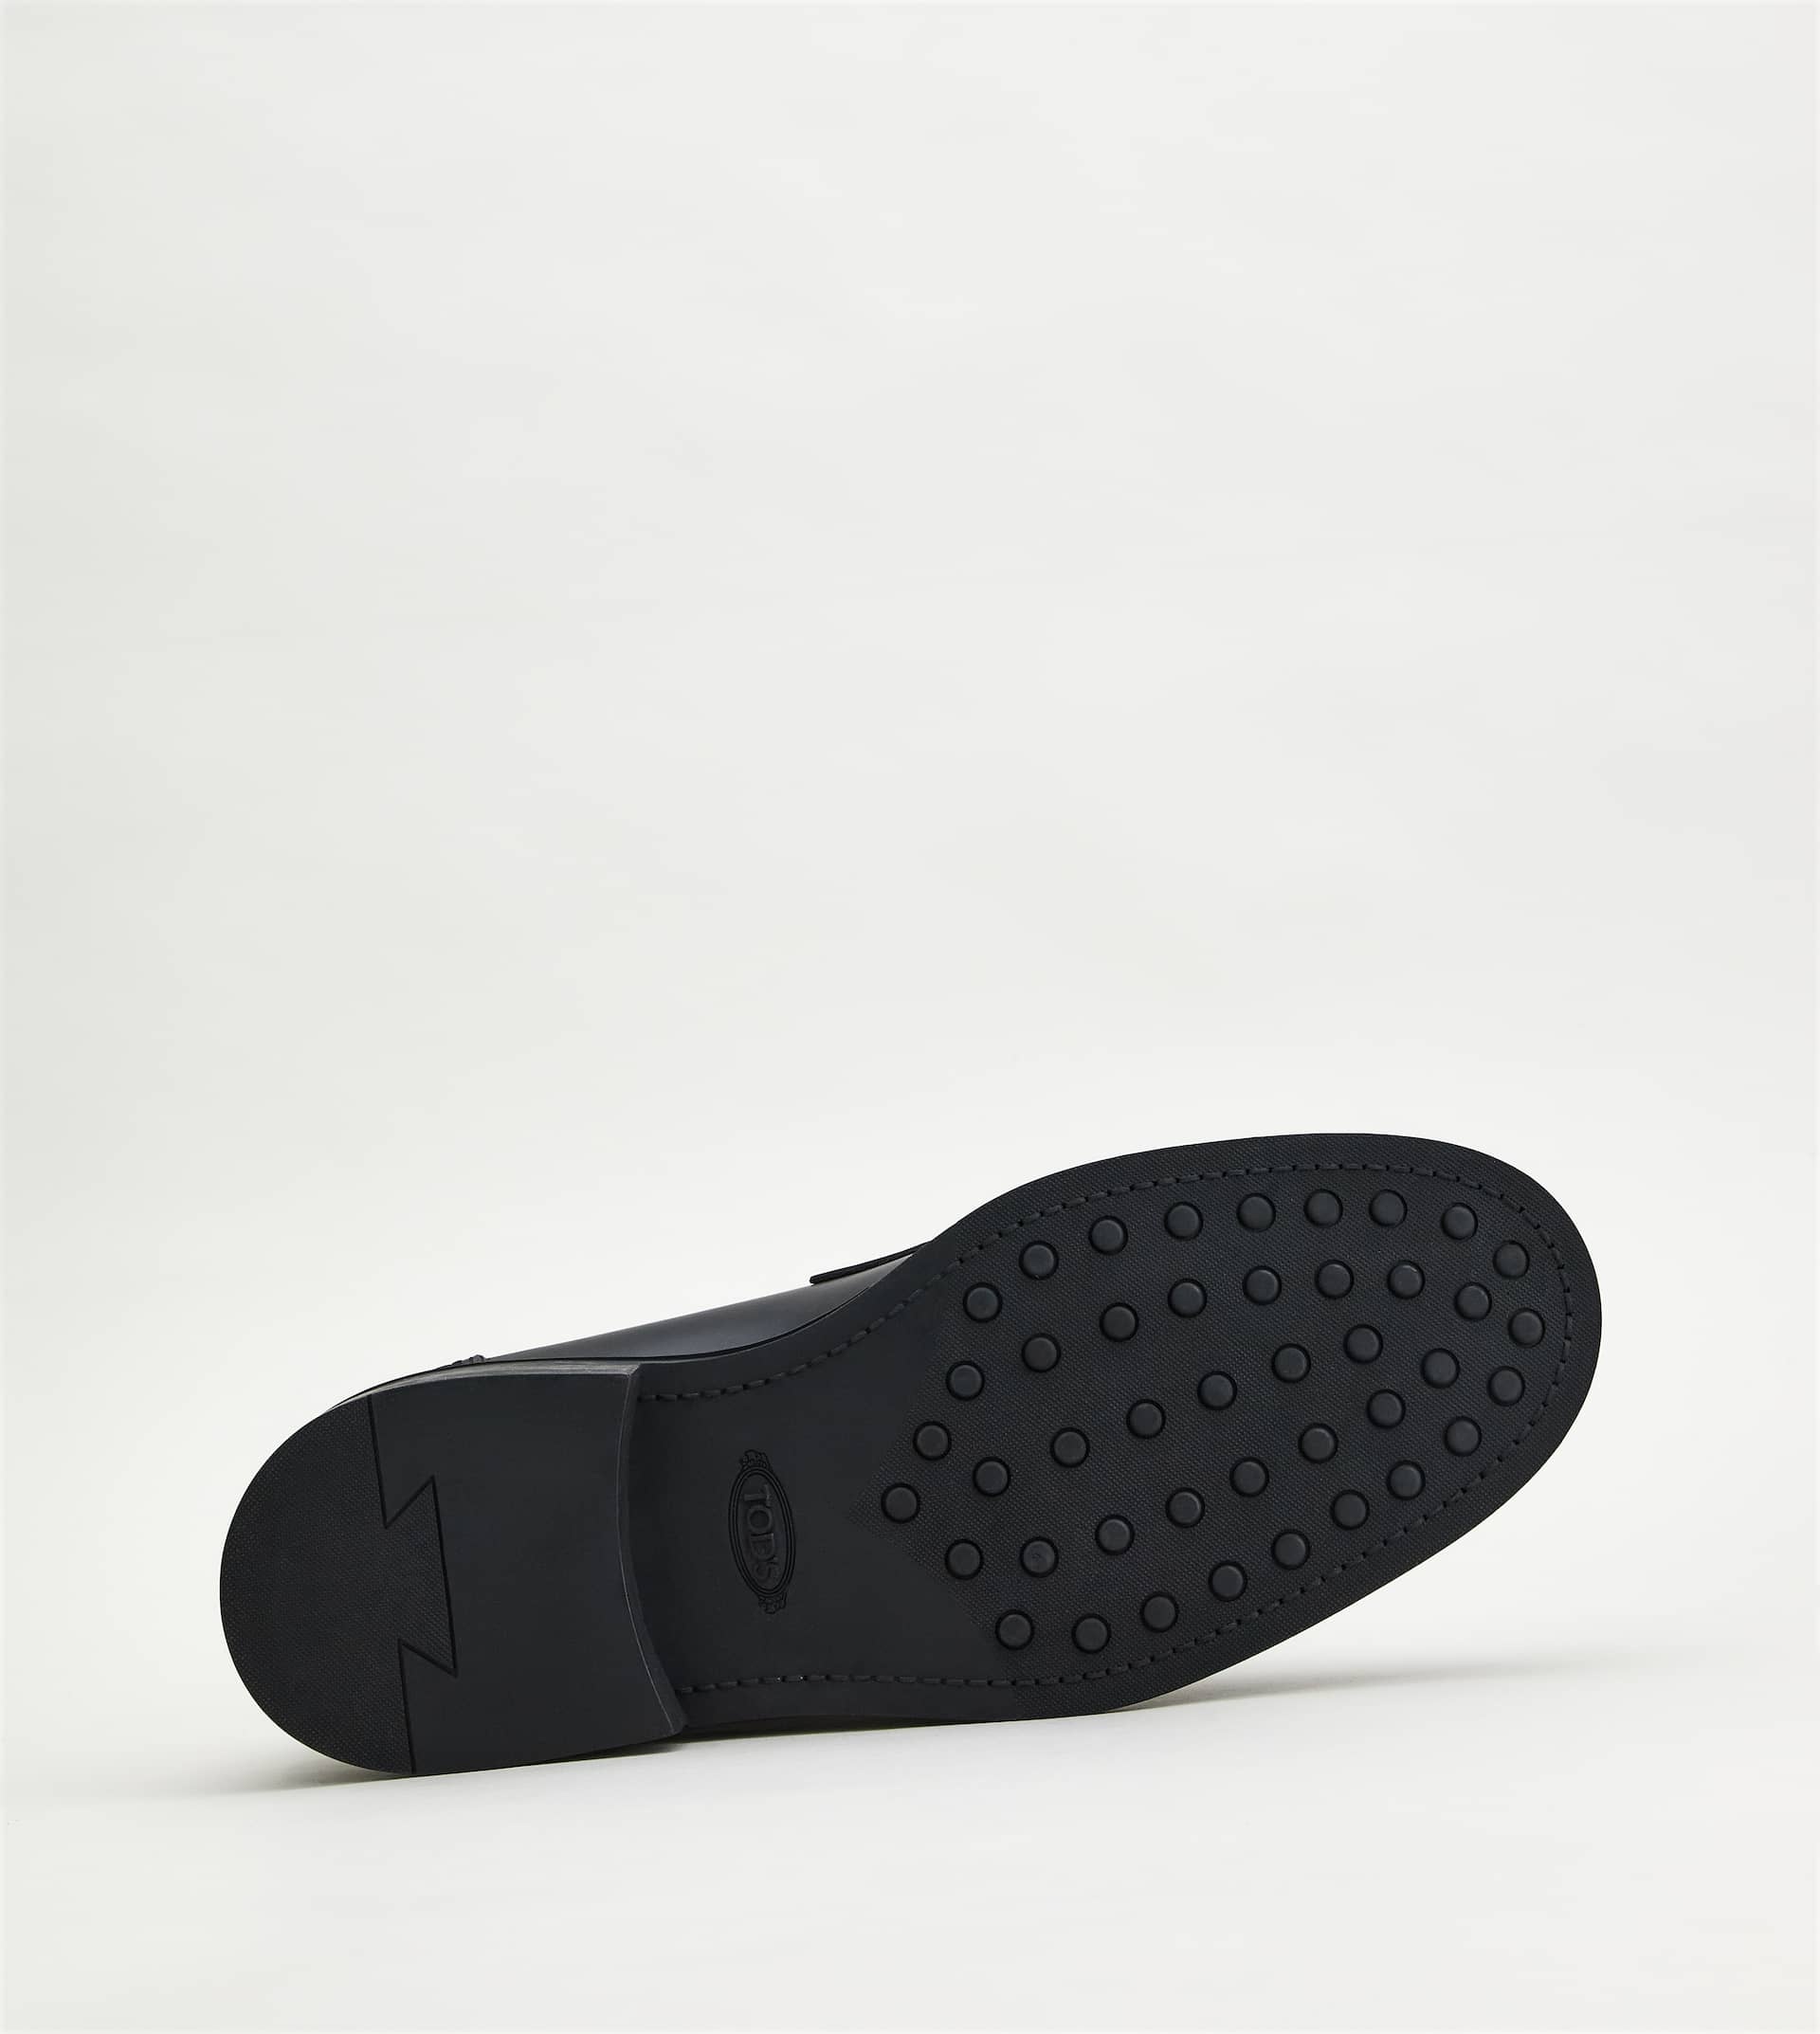 LOAFERS IN LEATHER - BLACK - 4